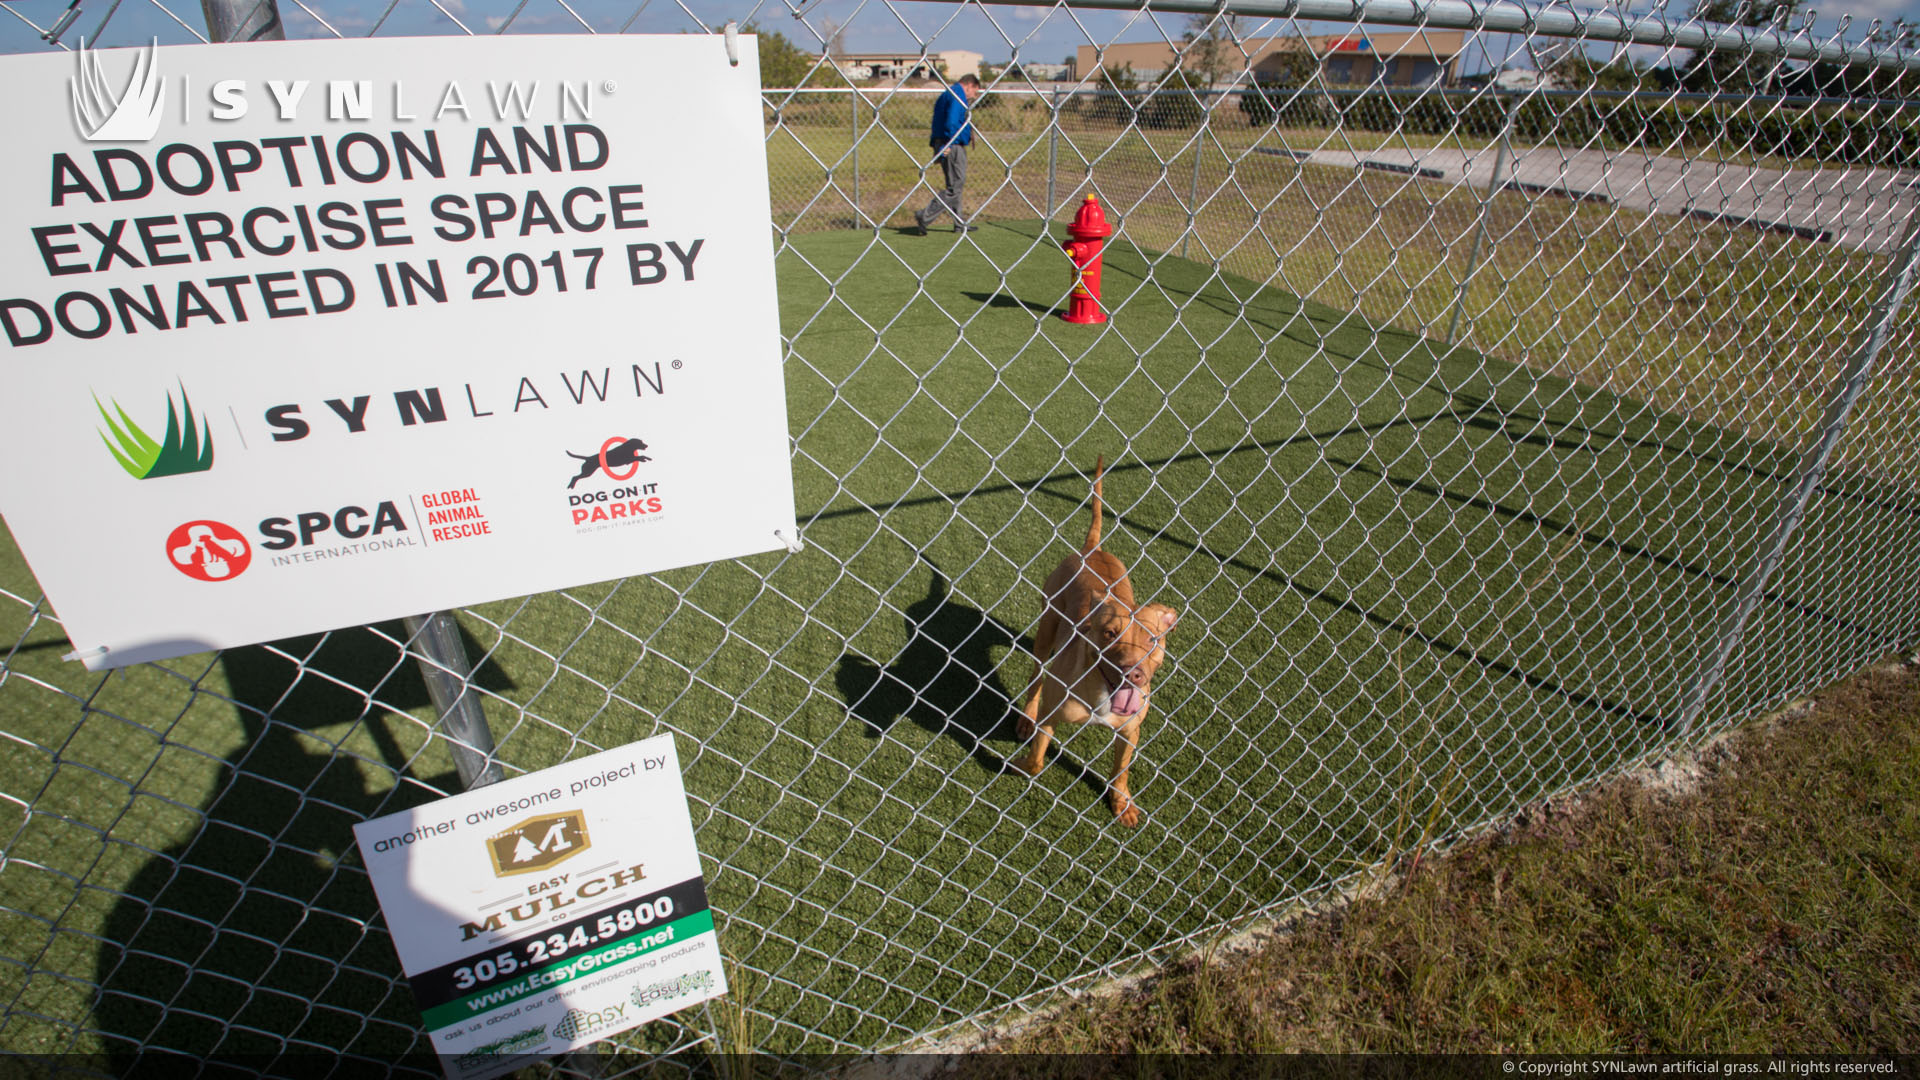 image of Humane Society of Port St Lucie County artificial grass pen for pets